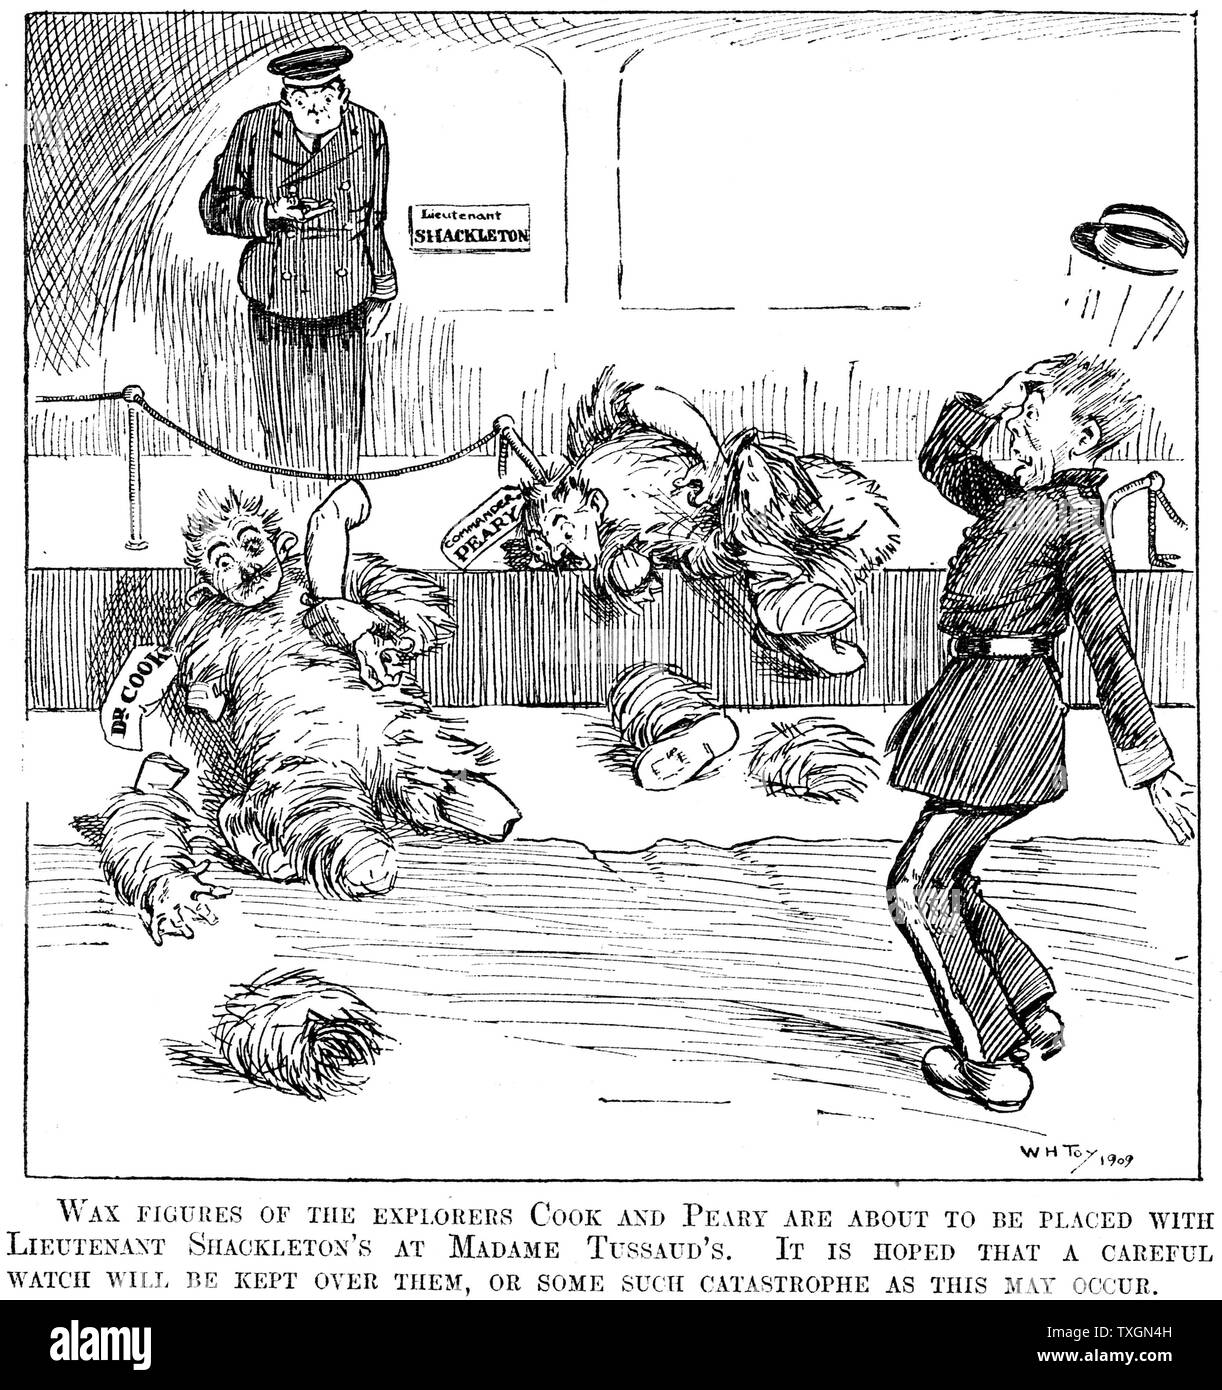 R.E. Peary claimed he had reached North Pole in 1909 at his third attempt. Claim generally accepted. F.A. Cook claimed he had reached it in 1908. Their images were placed in Madame Tussaud's waxworks, London Cartoon from Punch, London, 29 September 1909, hoping they will not come to blows Engraving Stock Photo